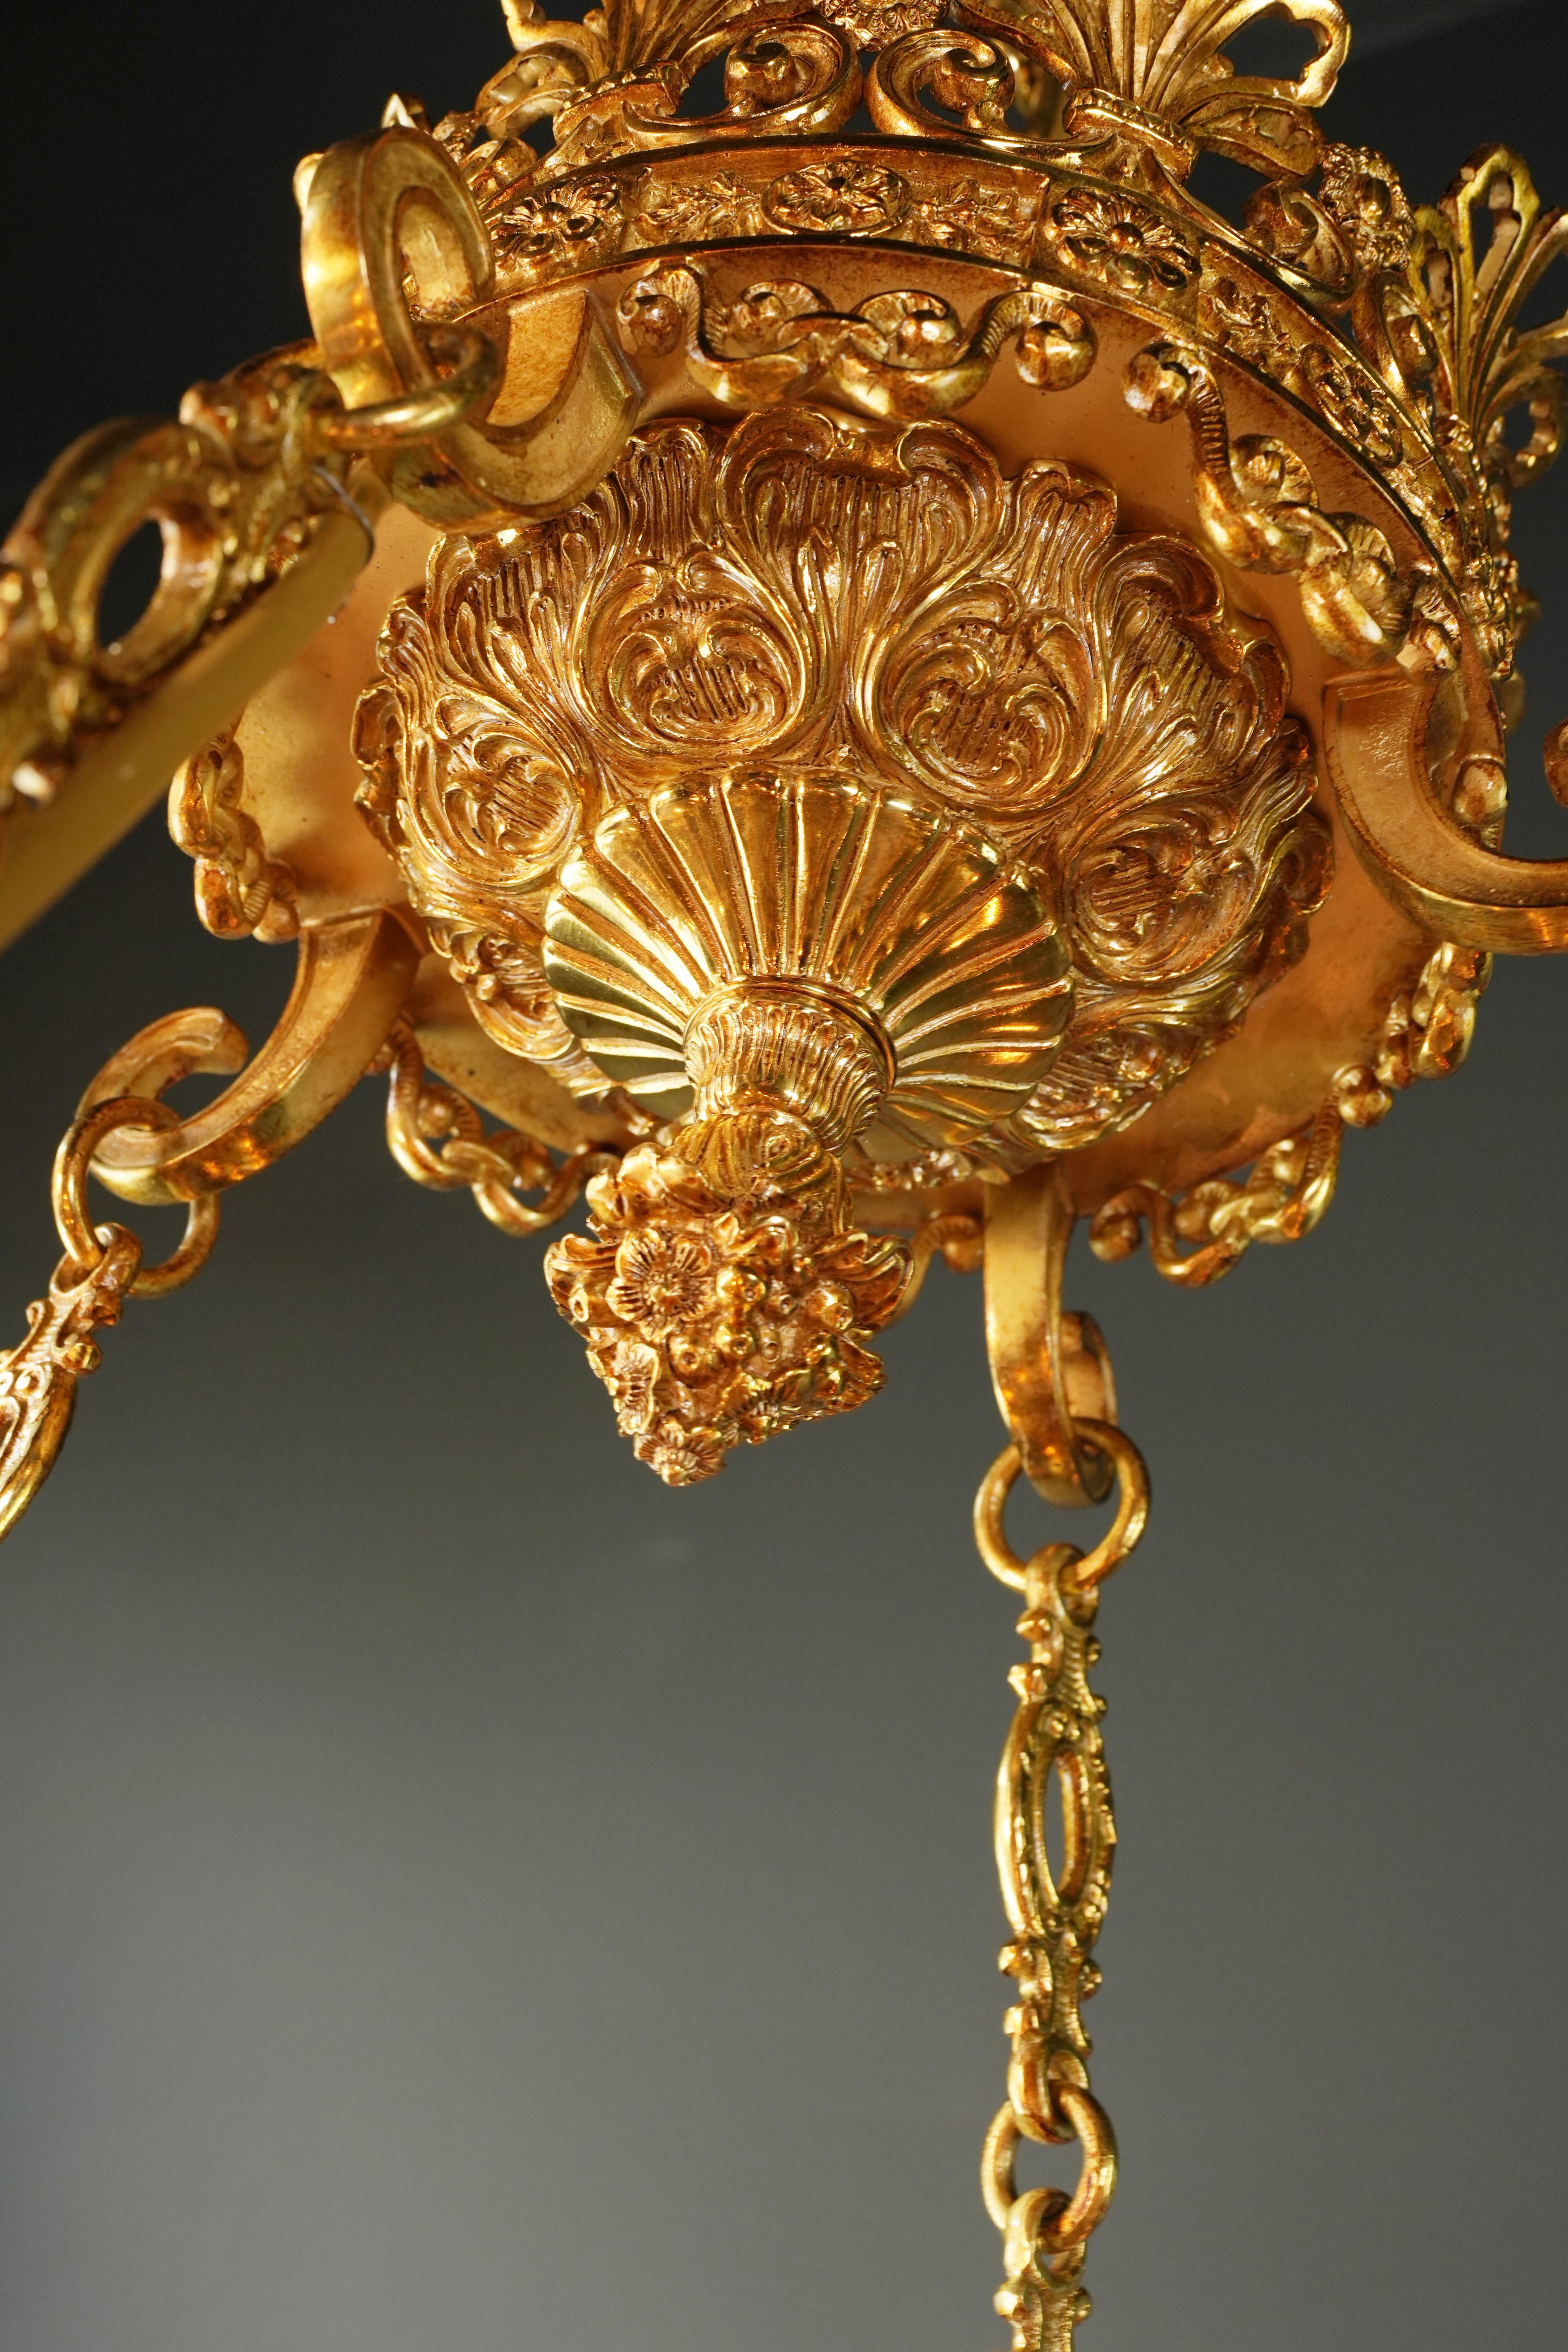 21st Century Baroque Brass Empire Chandelier Crystal Lustre Lamp Antique Gold  For Sale 7